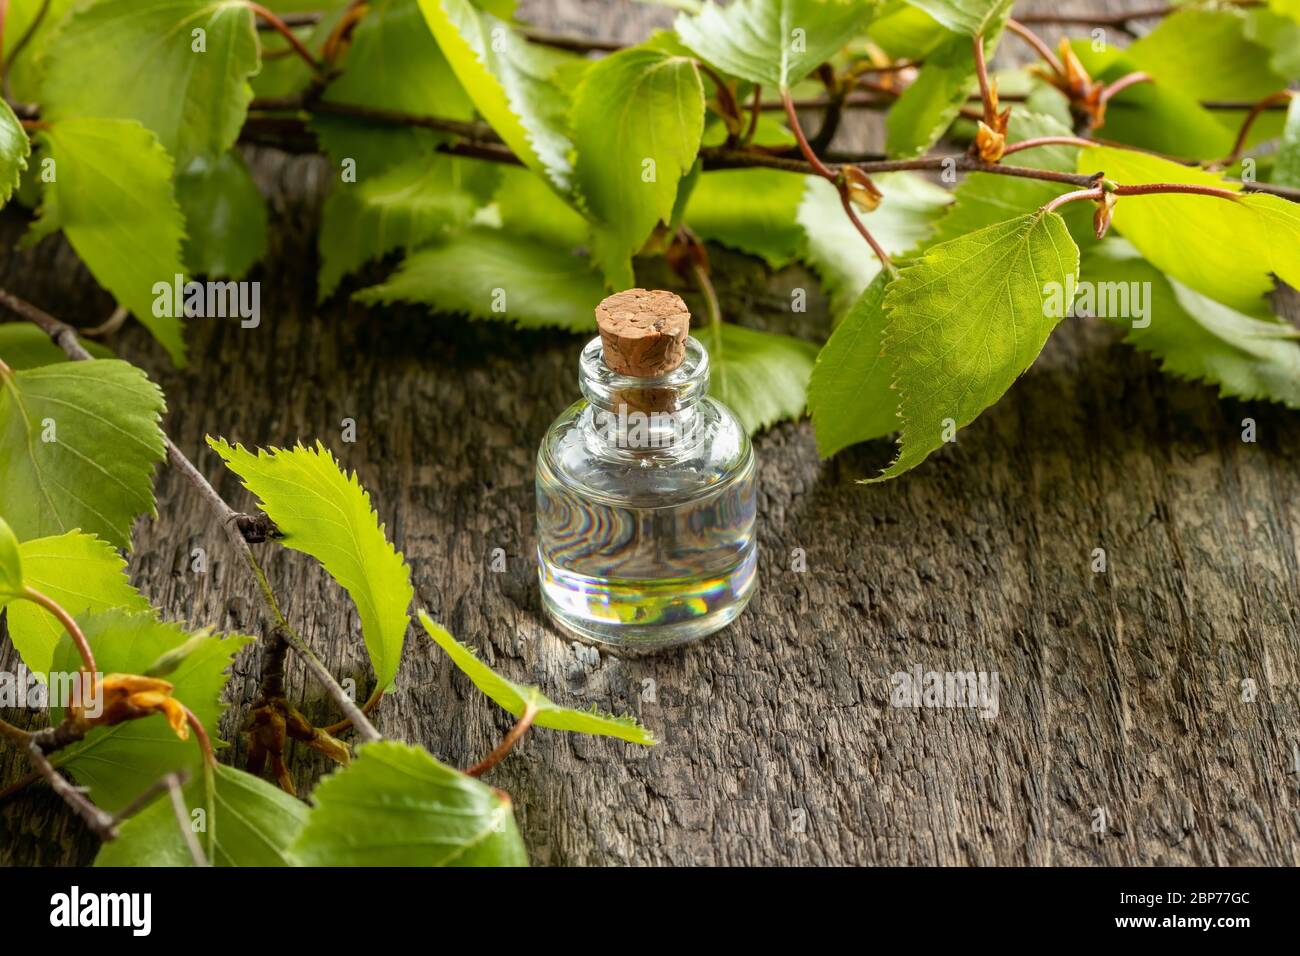 A bottle of essential oil with young birch leaves Stock Photo